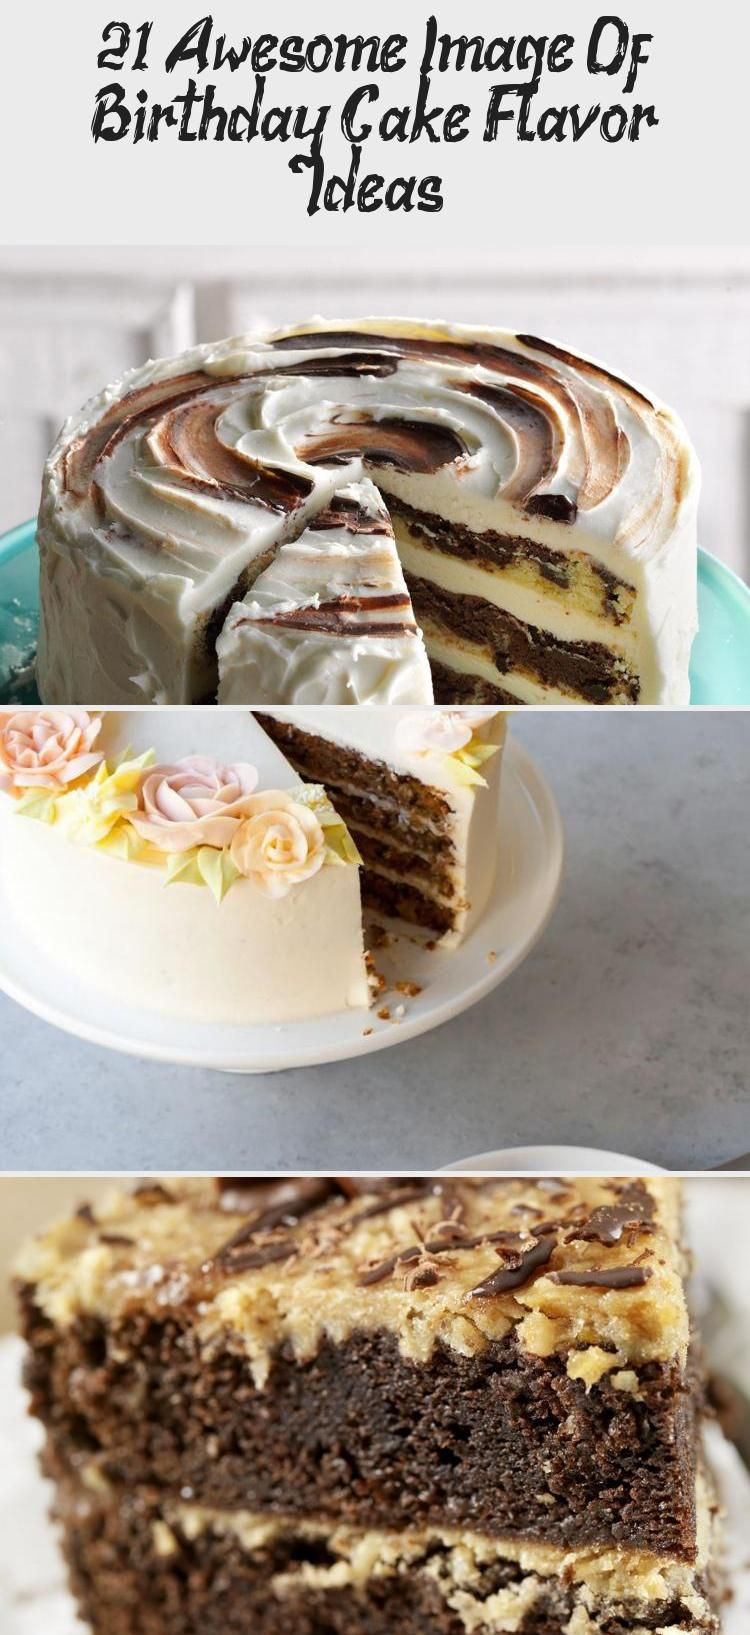 Birthday Cake Flavor Ideas
 21 Awesome Image Birthday Cake Flavor Ideas